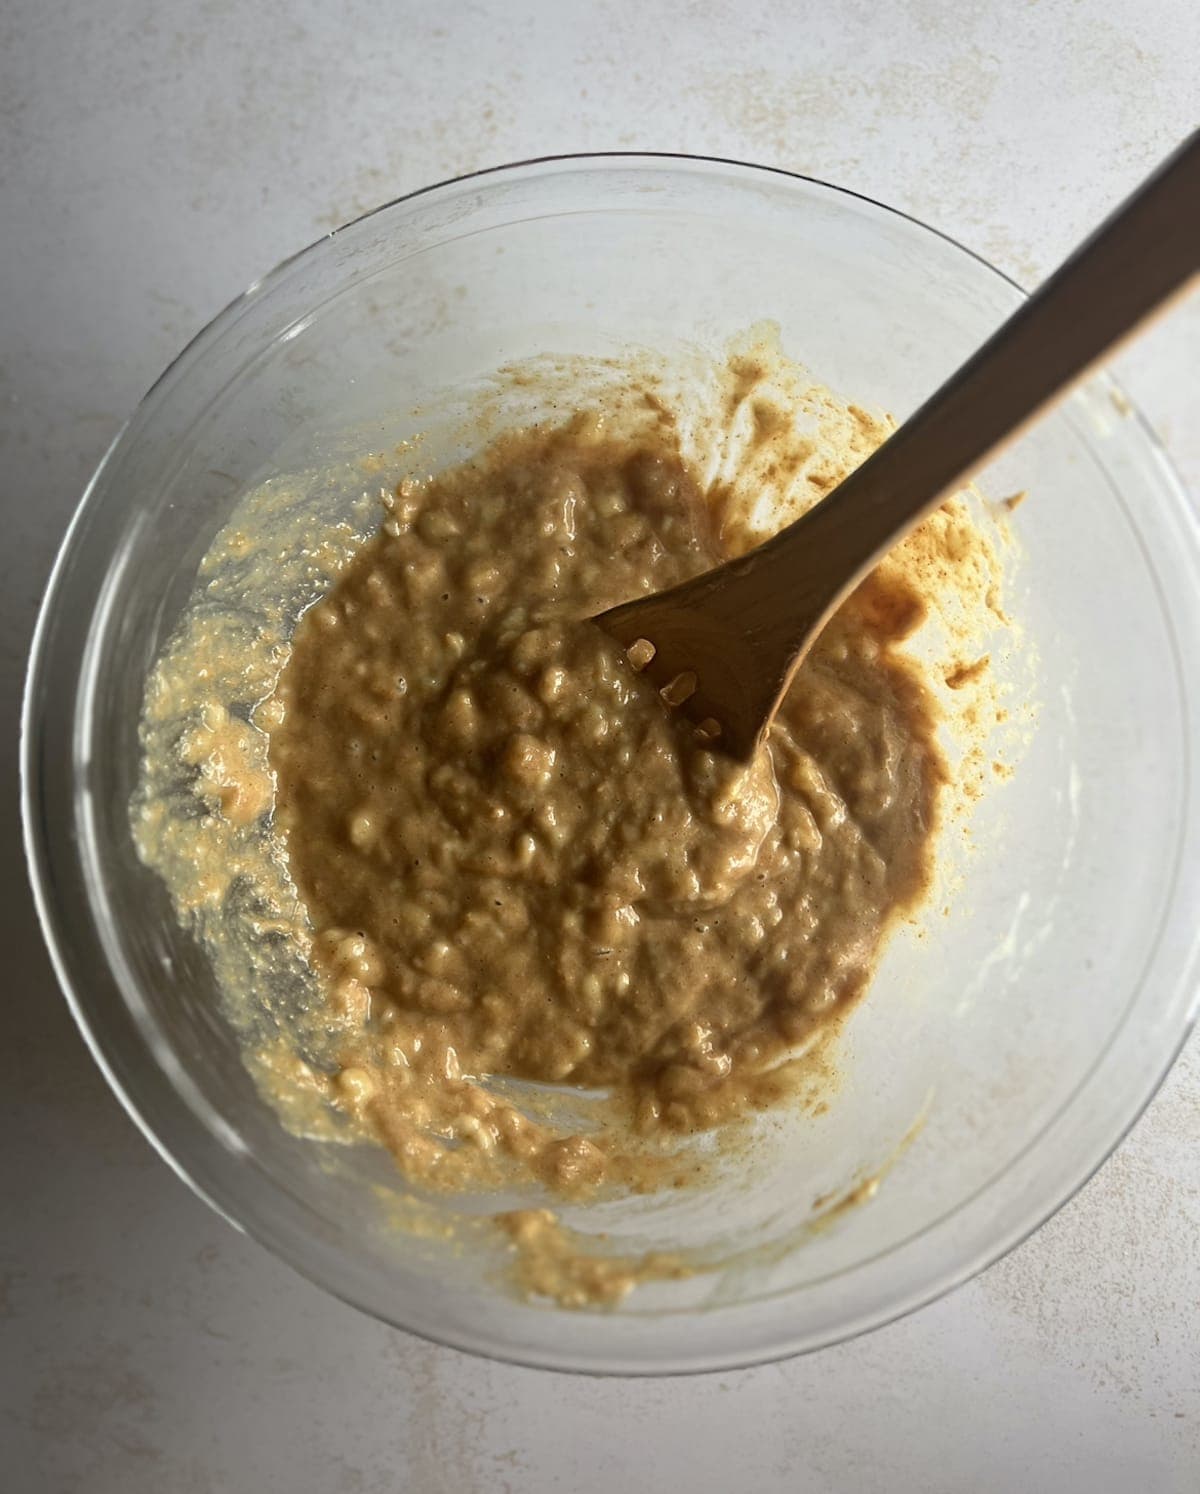 This is a photo of oatmeal bars batter.